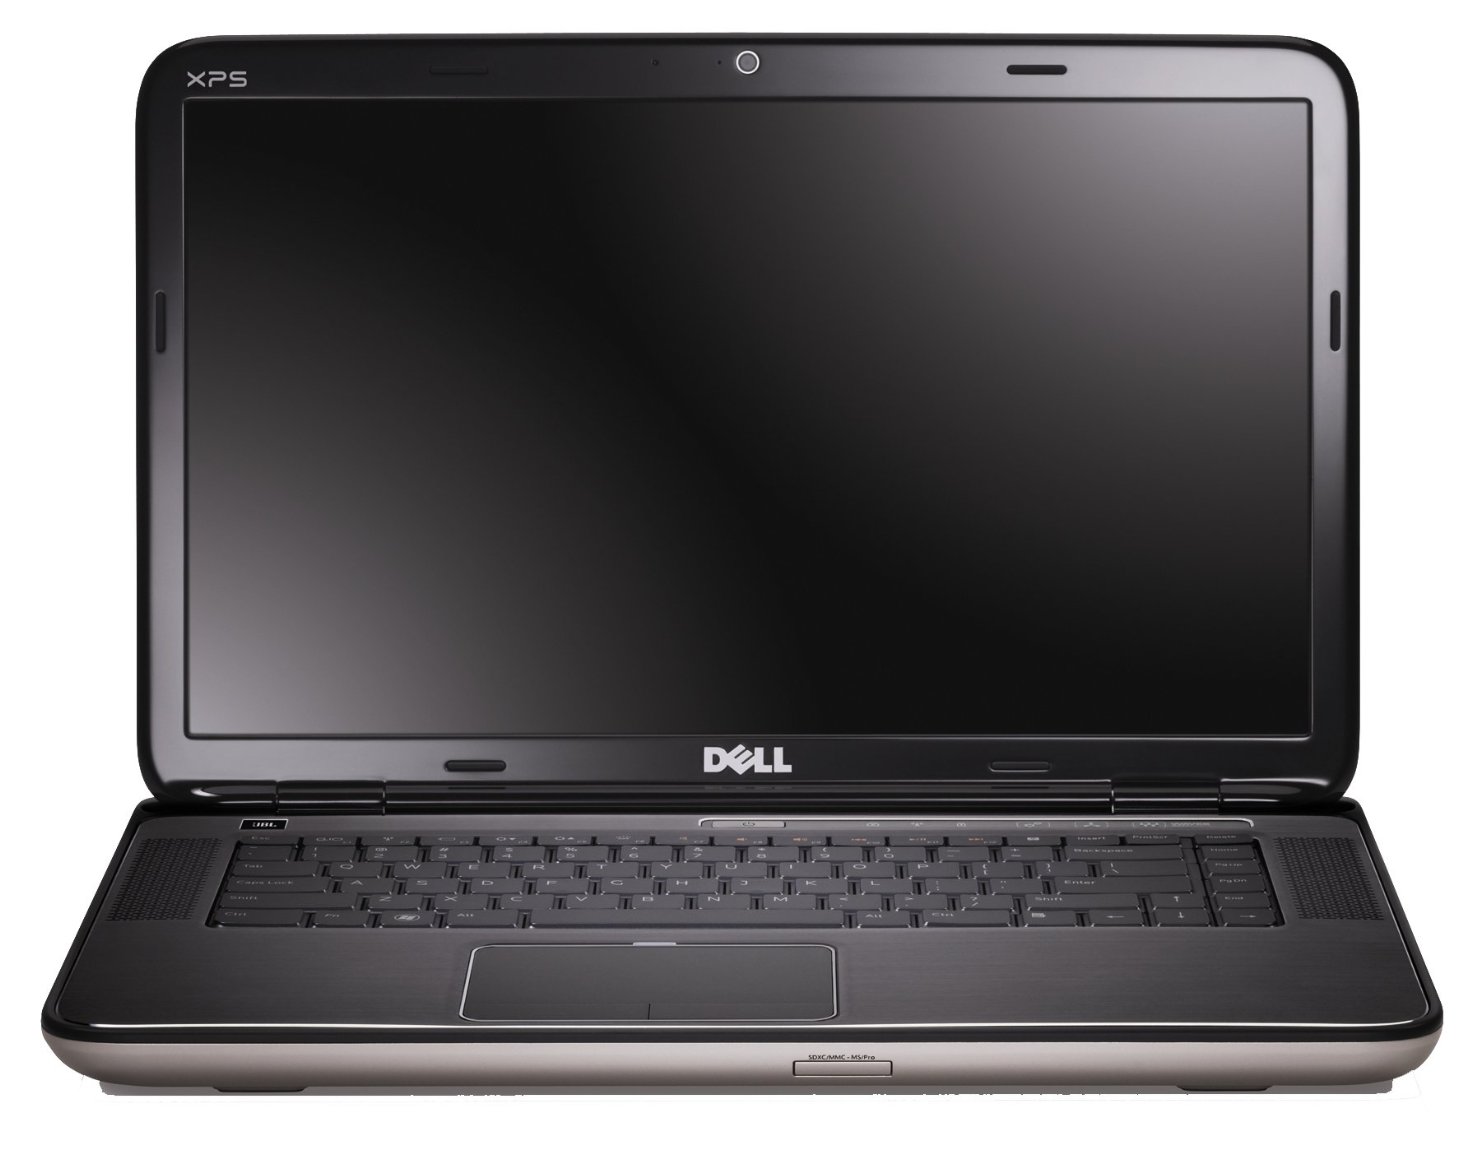   Dell XPS 15 (9570-5420)  1